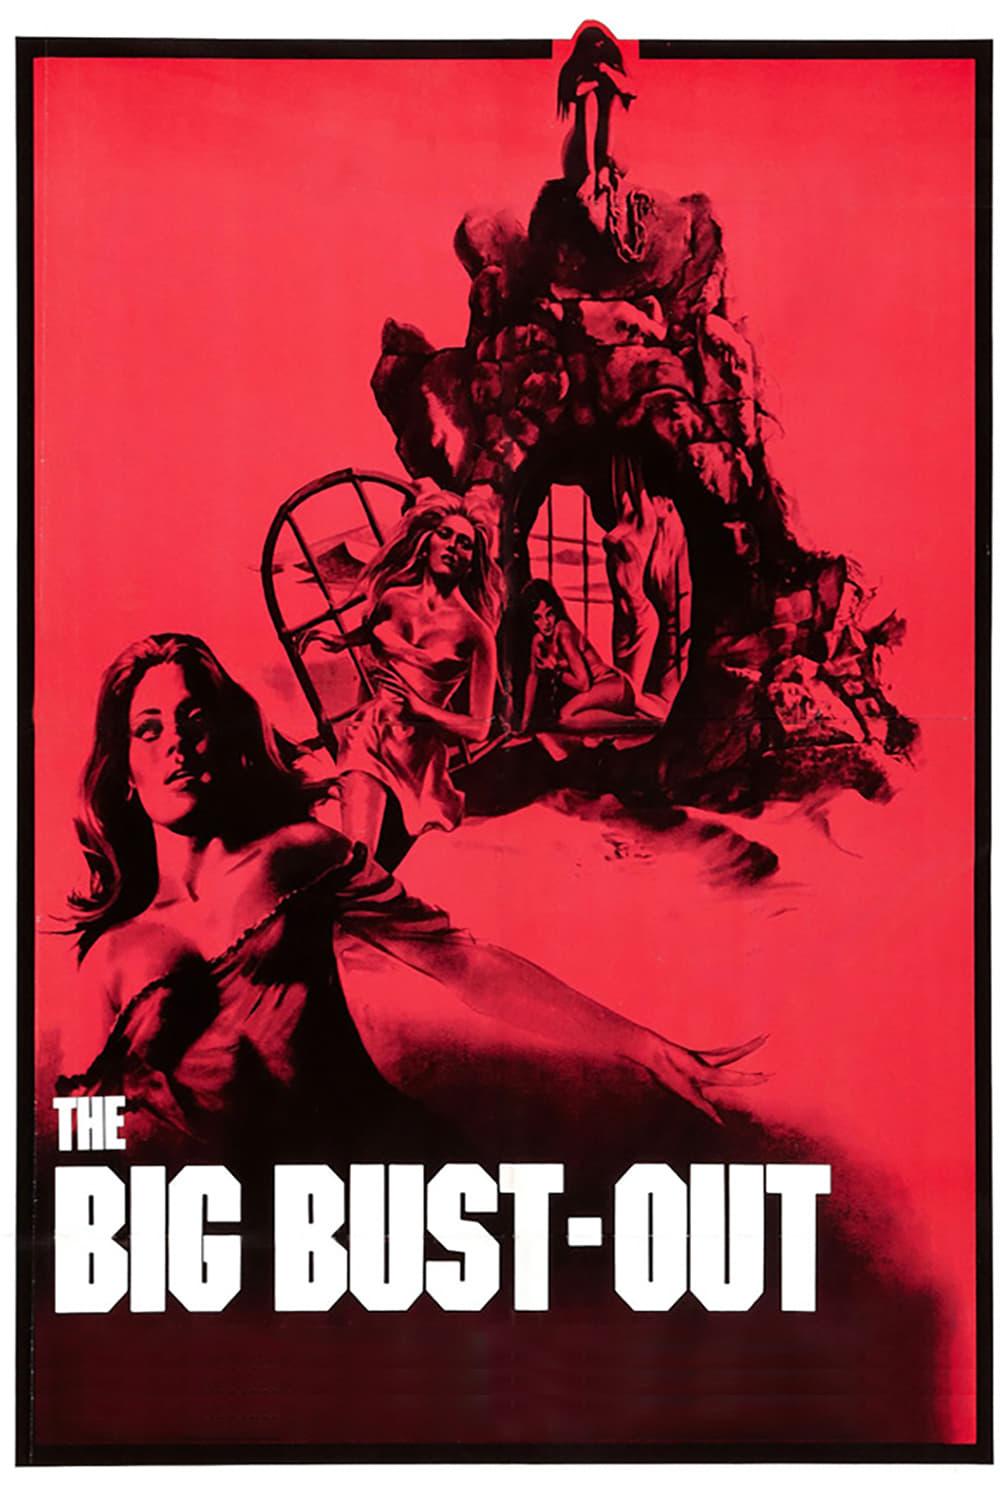 The Big Bust Out poster